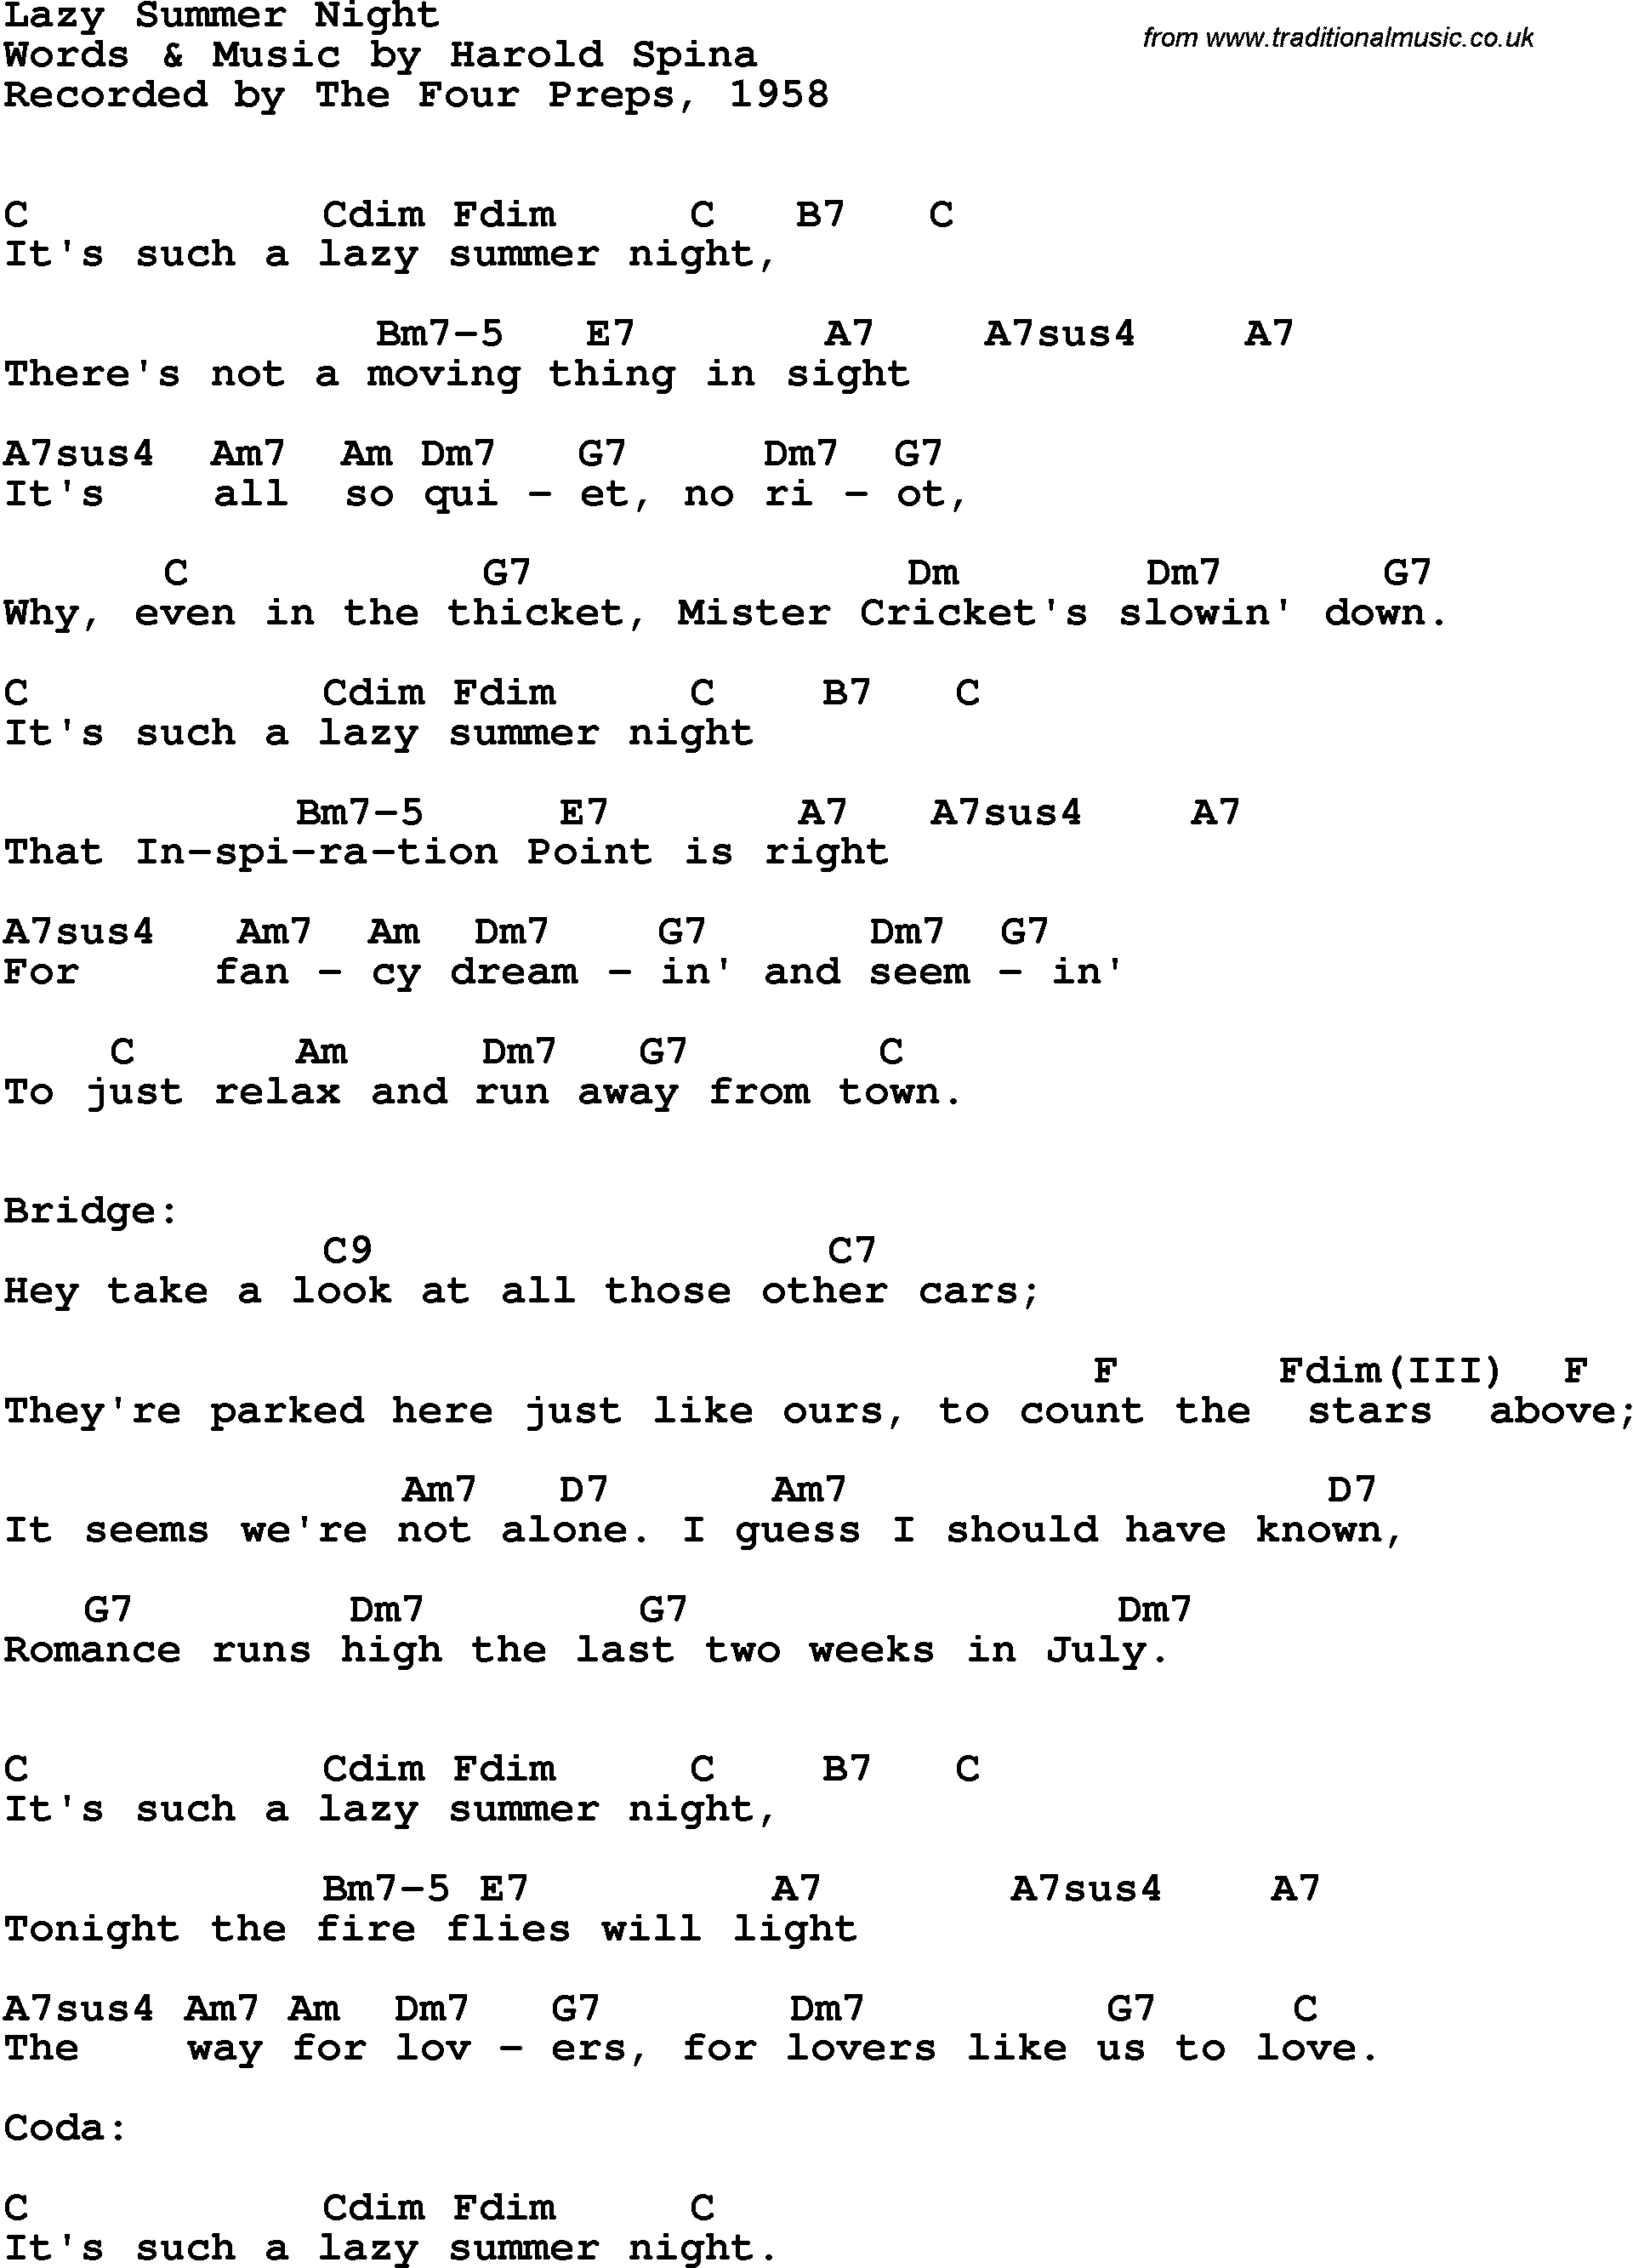 Song Lyrics with guitar chords for Lazy Summer Night - The Four Preps, 1958